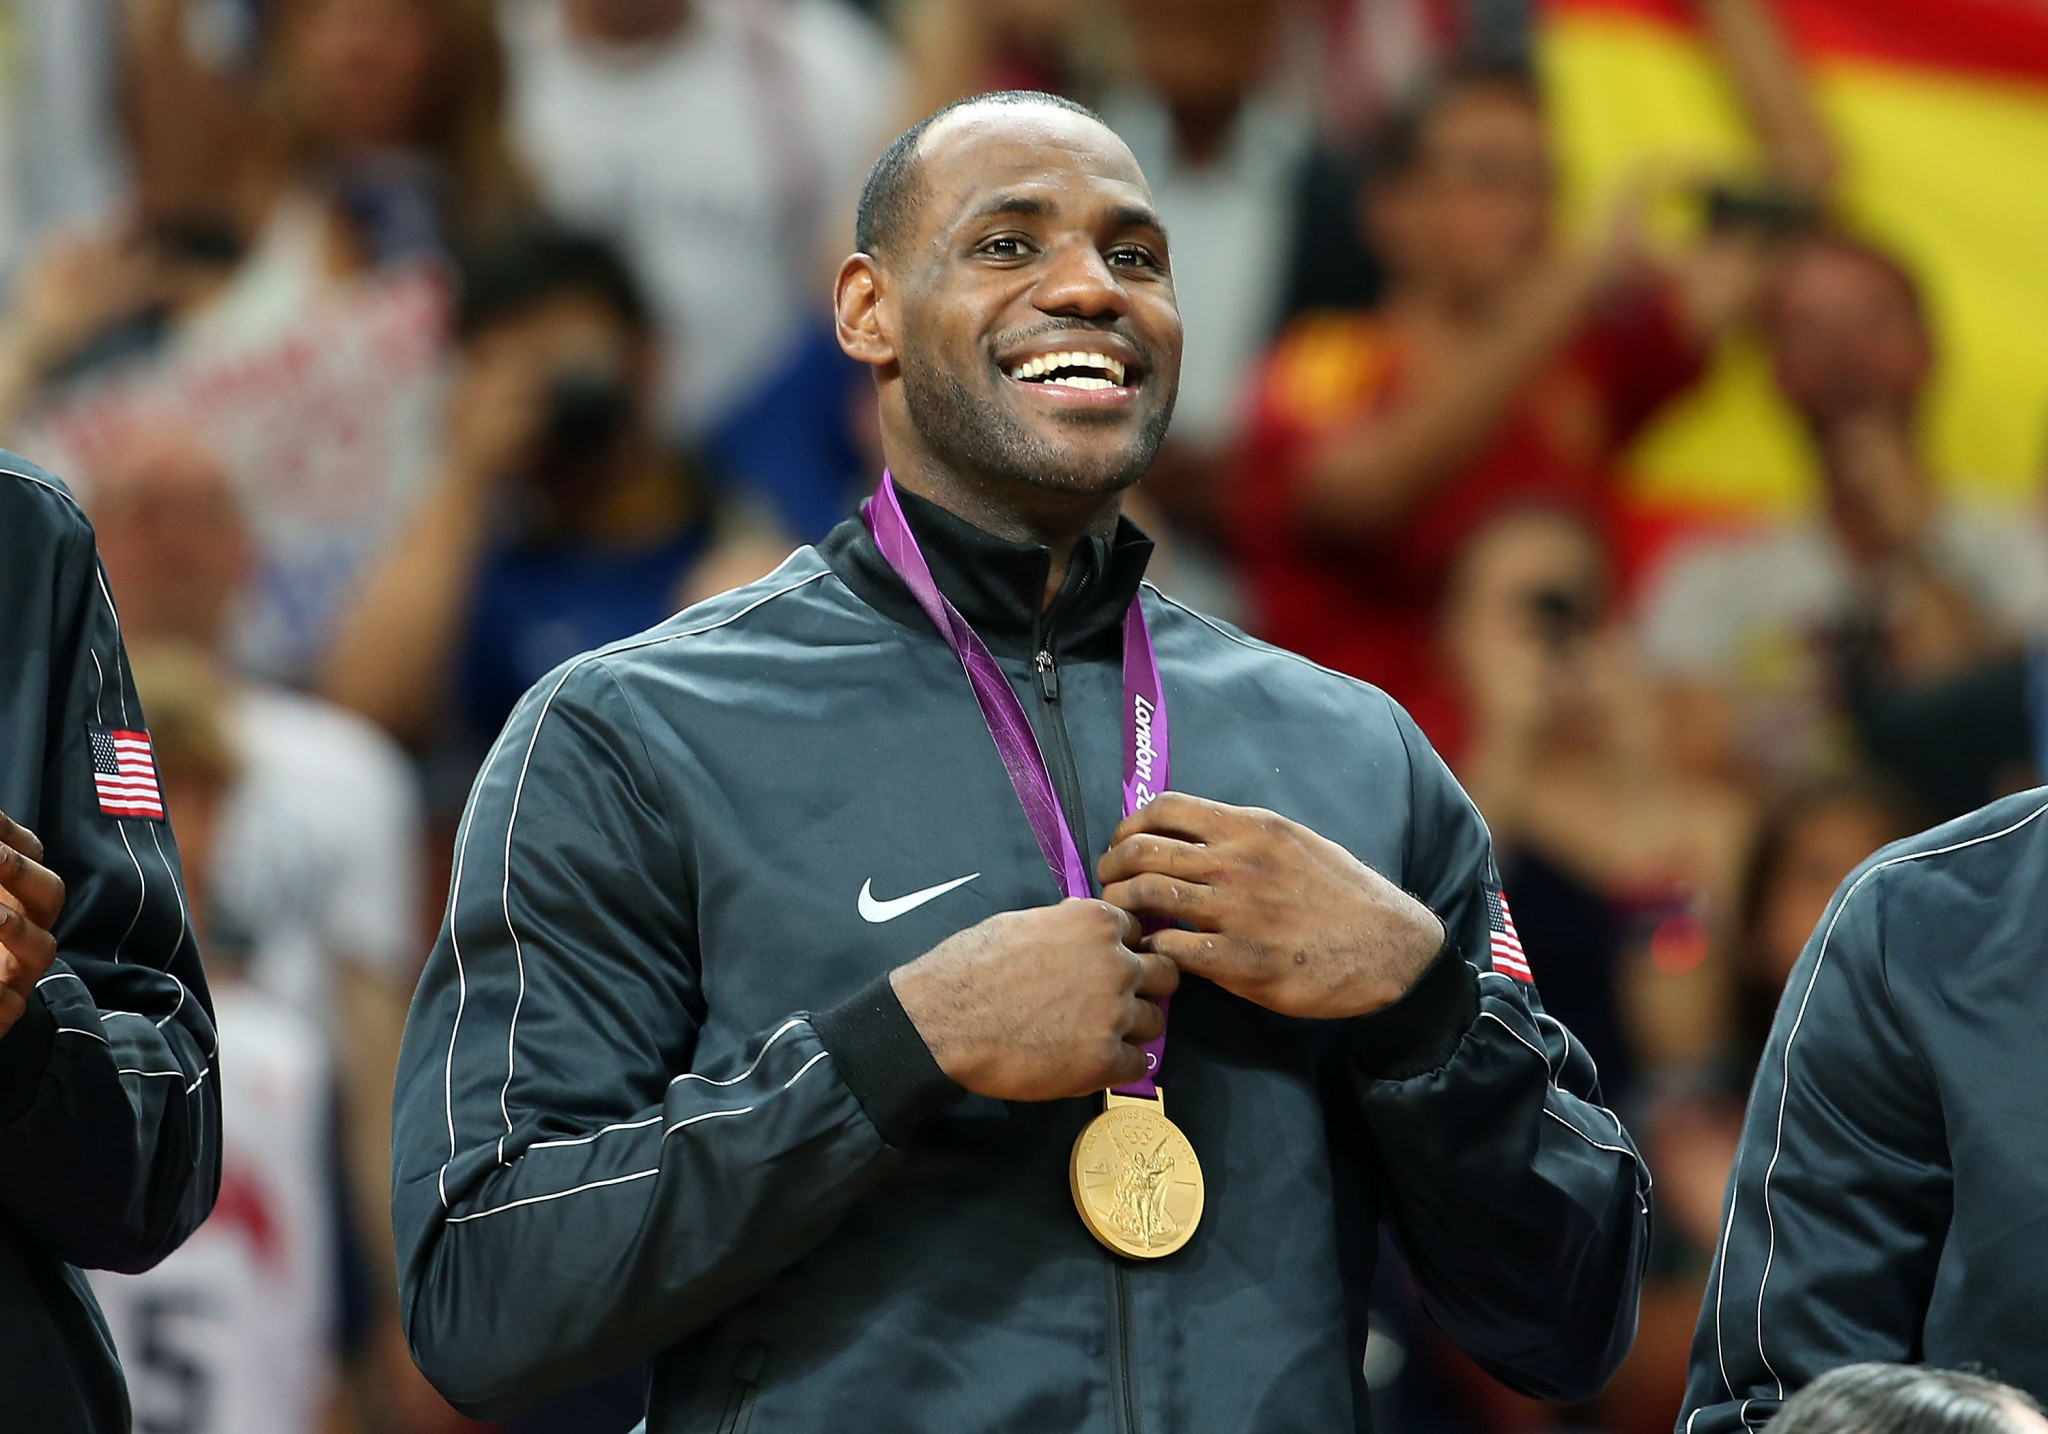 Only 6 players have won the NBA NBA finals and Olympic gold medal in